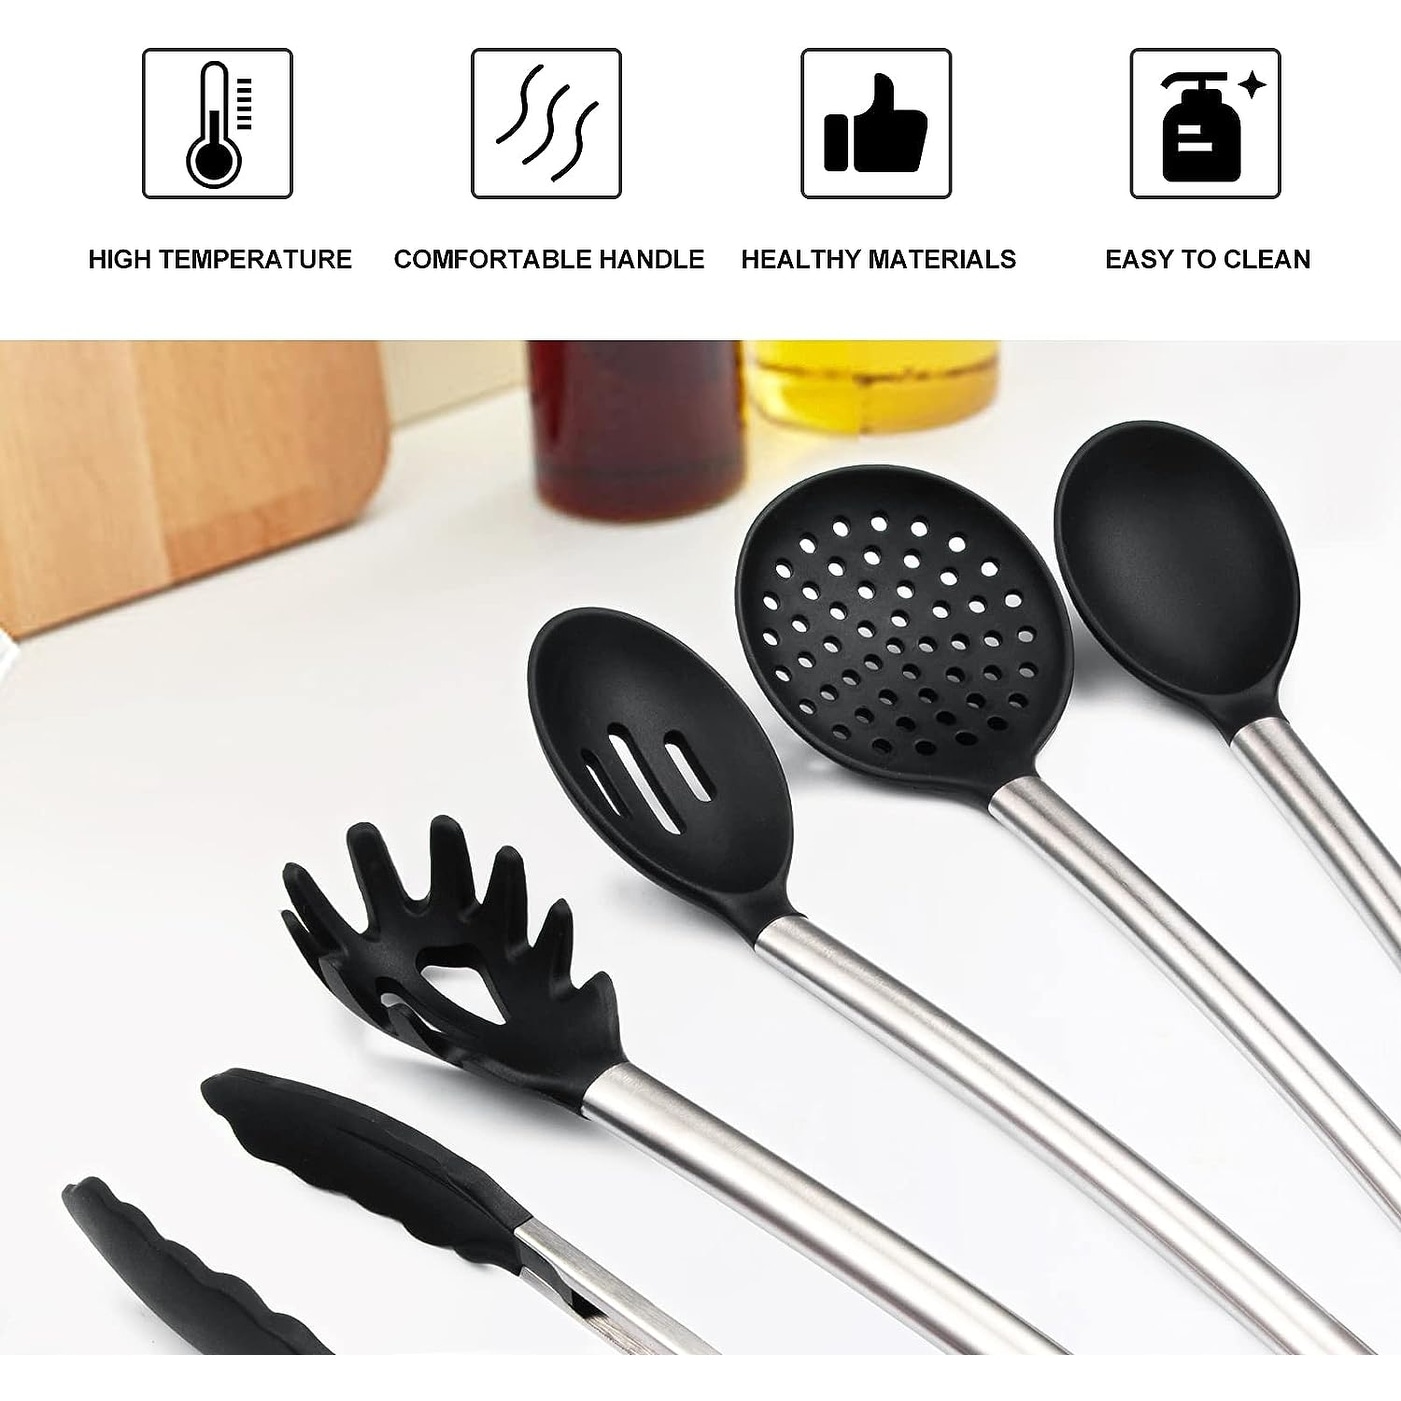 https://ak1.ostkcdn.com/images/products/is/images/direct/1009aca9bab14446b55f19977a6694aa5d9ab1cc/Kitchen-Utensils-Set-with-Holder%2C-Silicone-Cooking-Utensils-Gadget.jpg